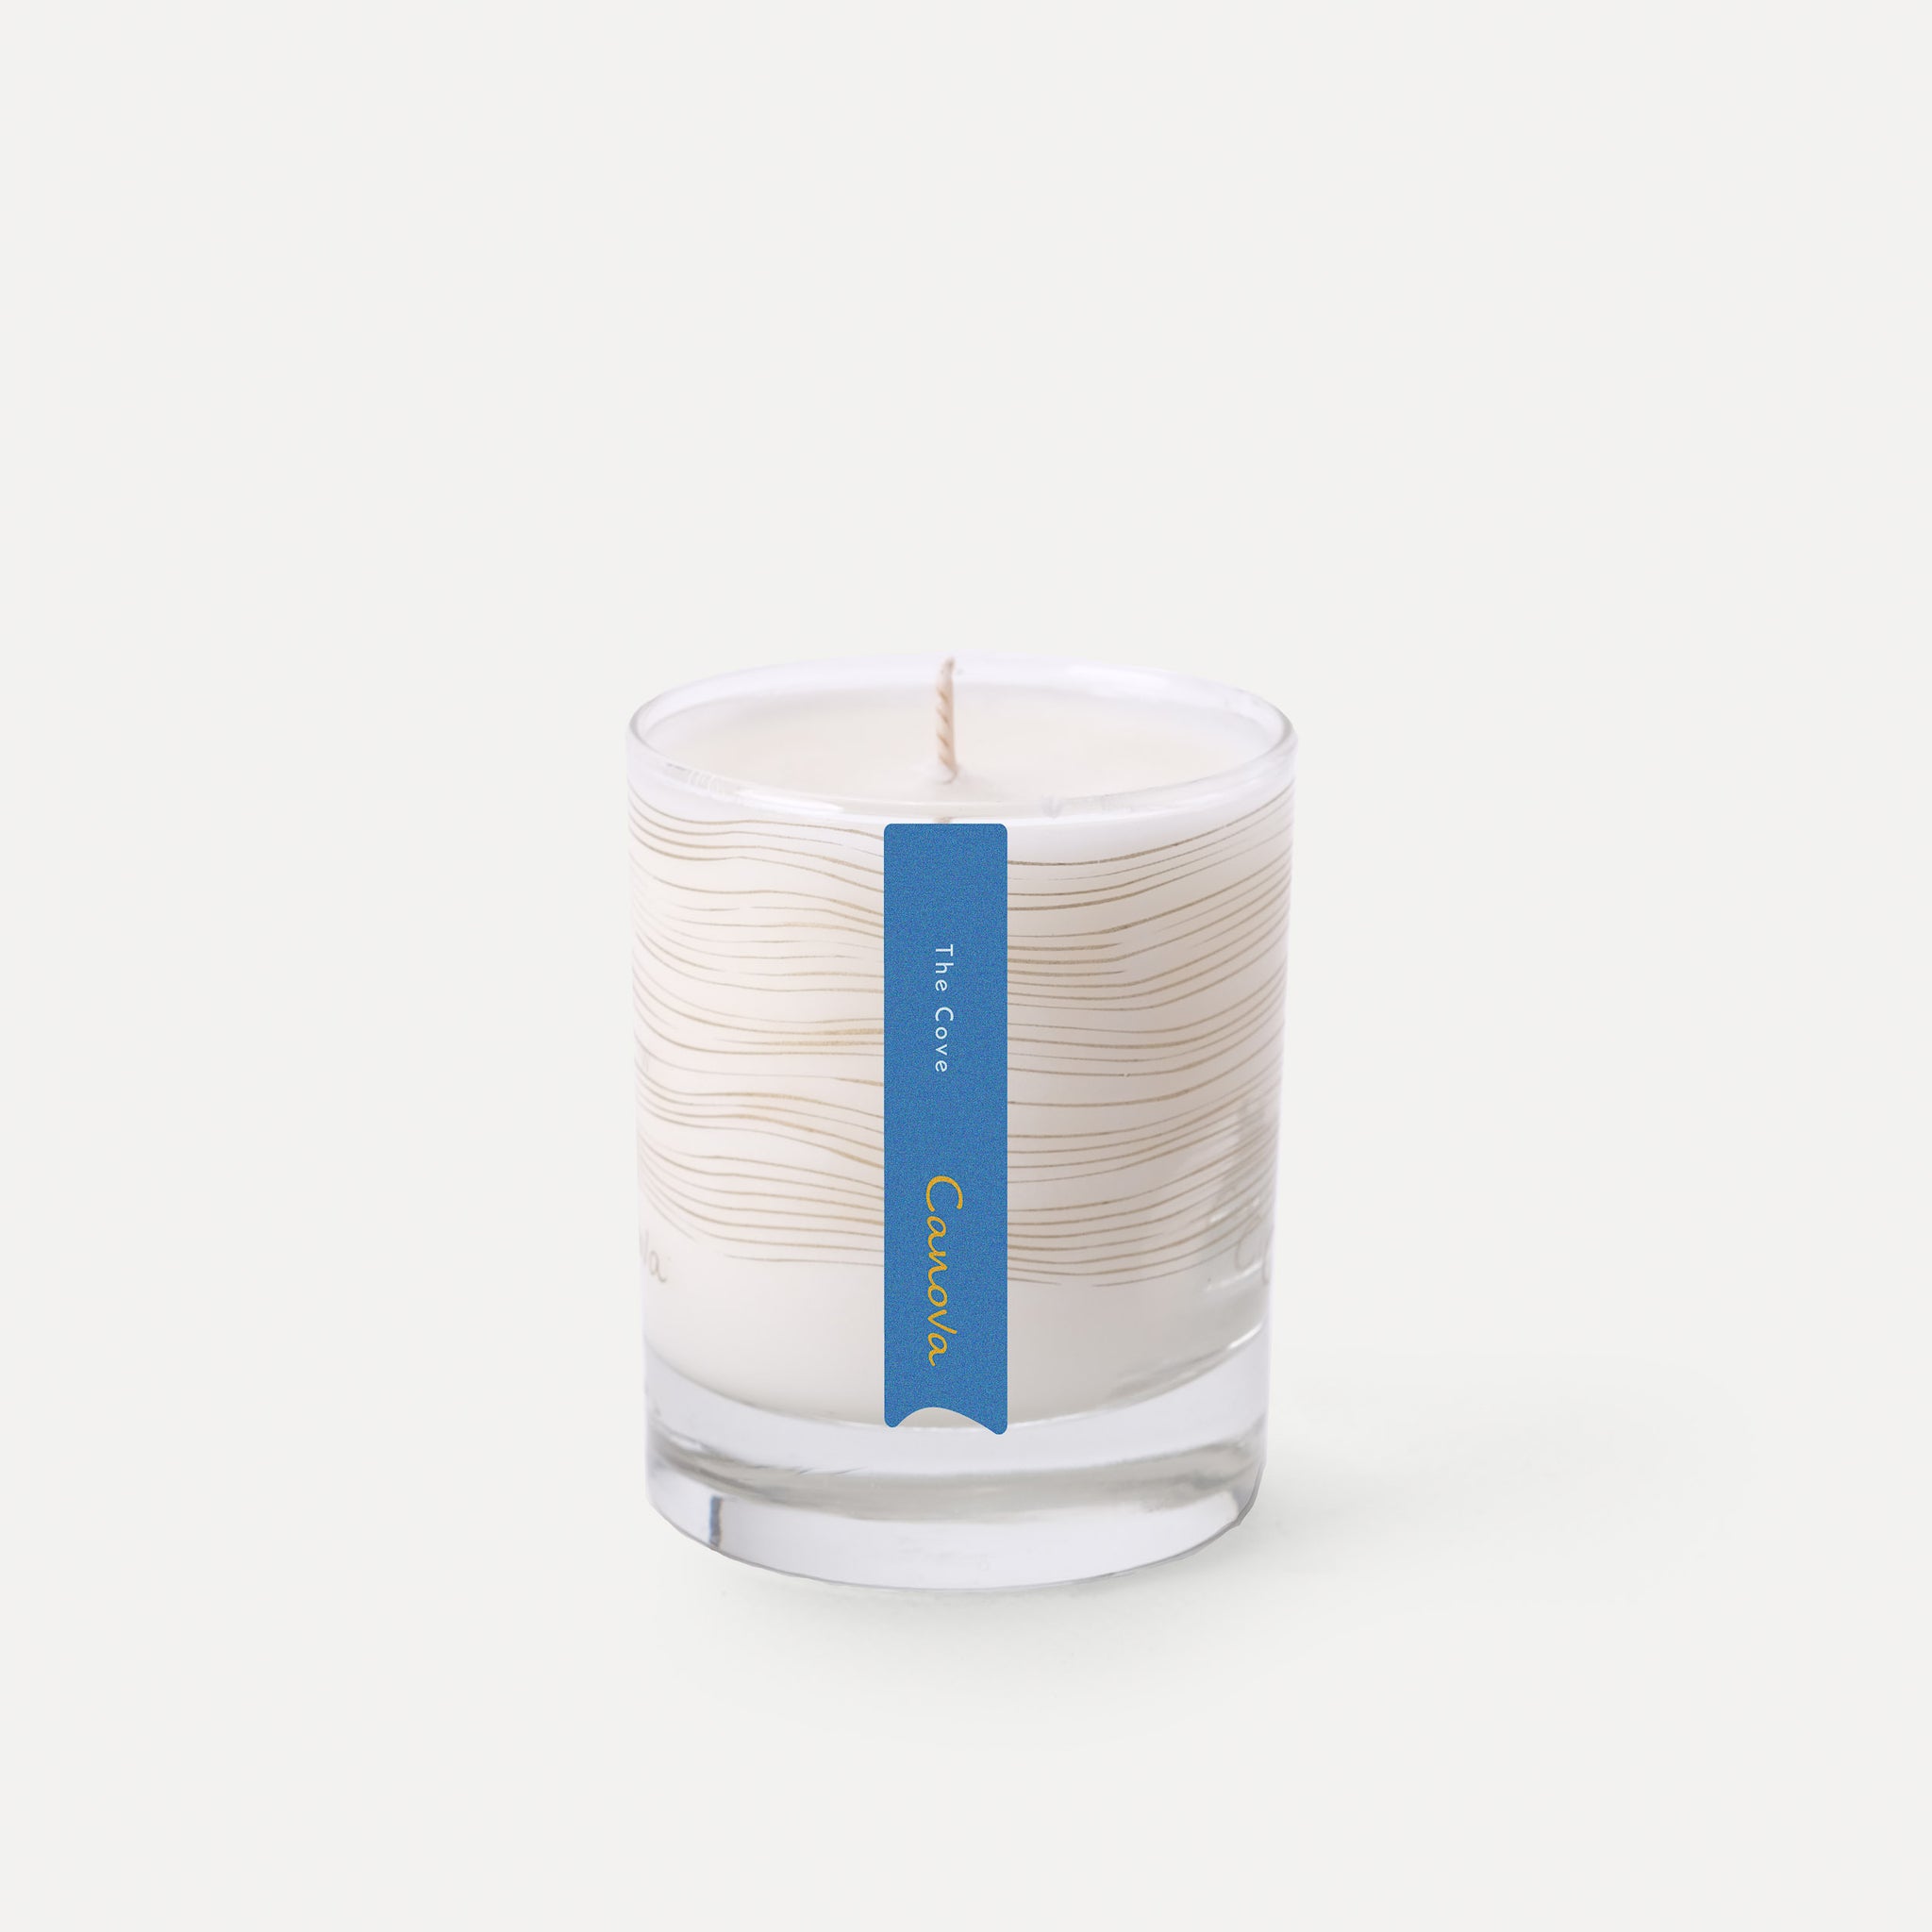 170g Signature - The Cove Candle